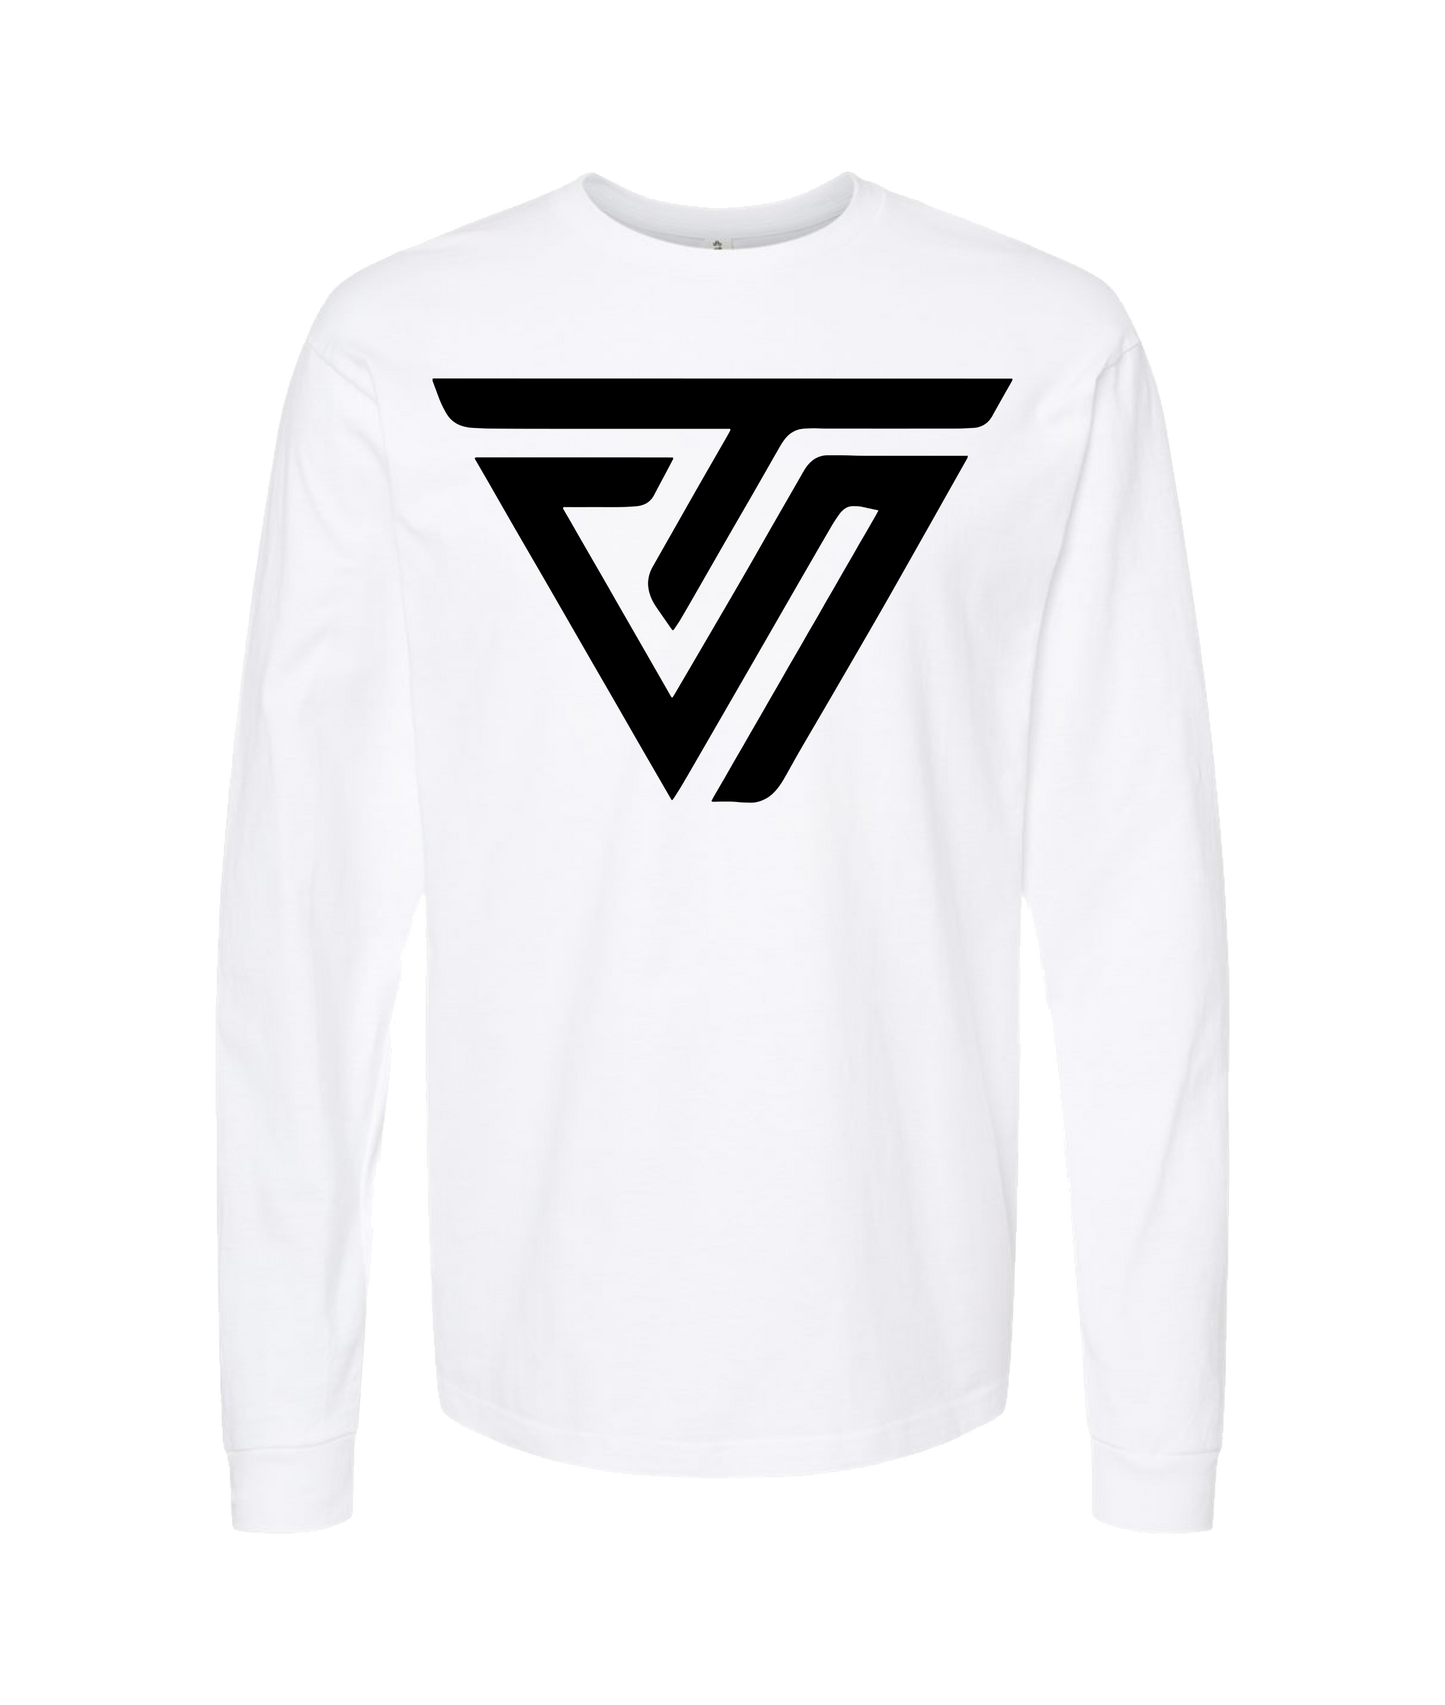 TheShift - The Triangle - White Long Sleeve T